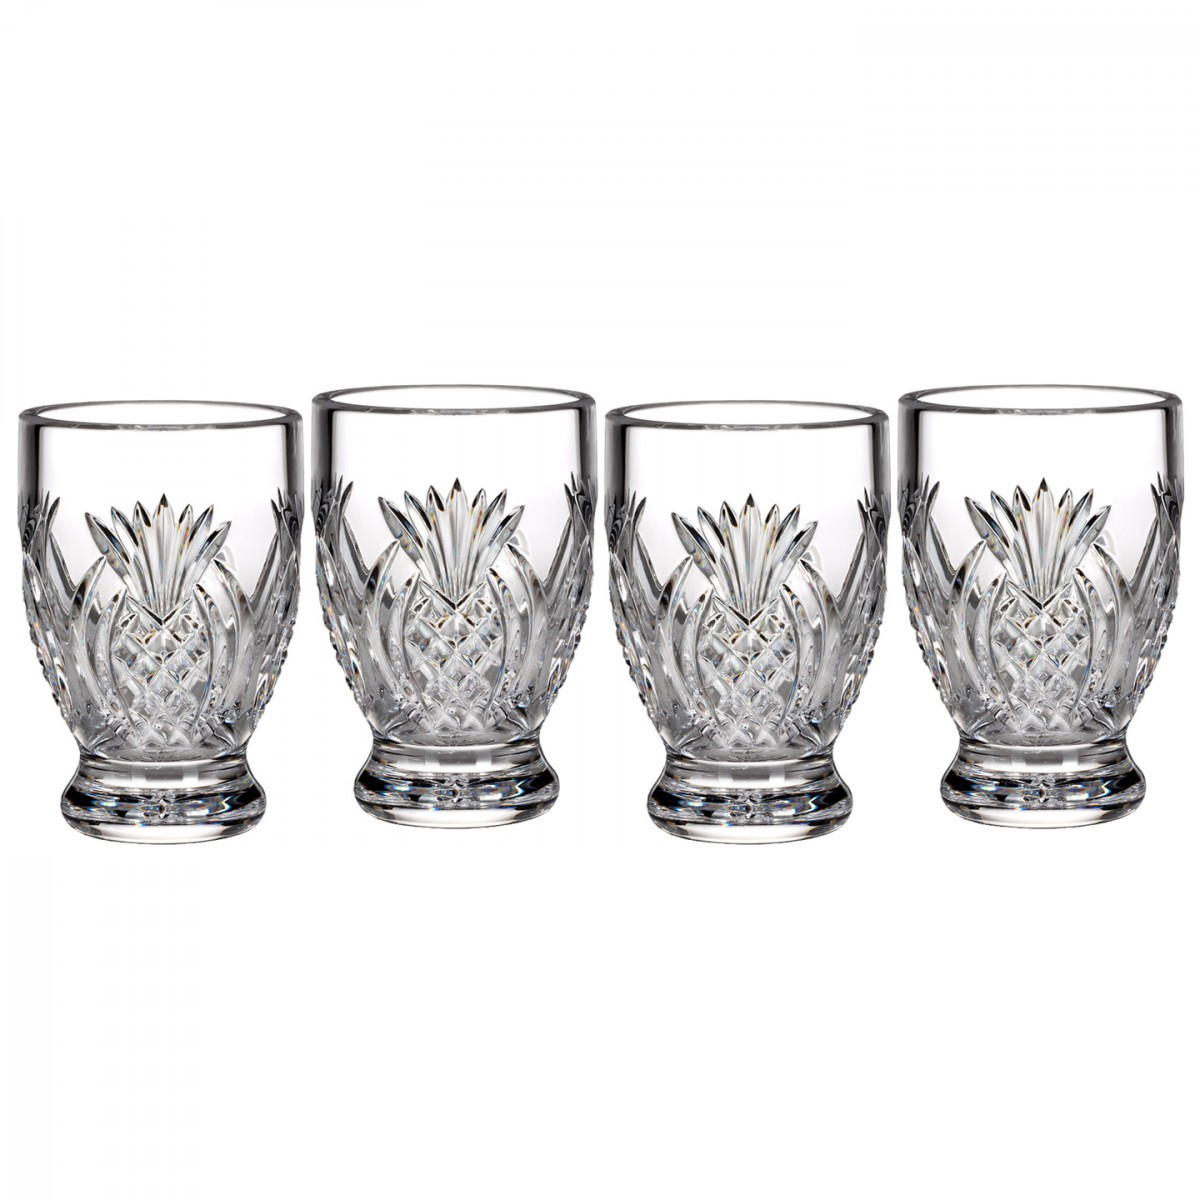 waterford pineapple vase of pineapple hospitality small glass set of 4 discontinued throughout pineapple hospitality small glass set of 4 discontinued